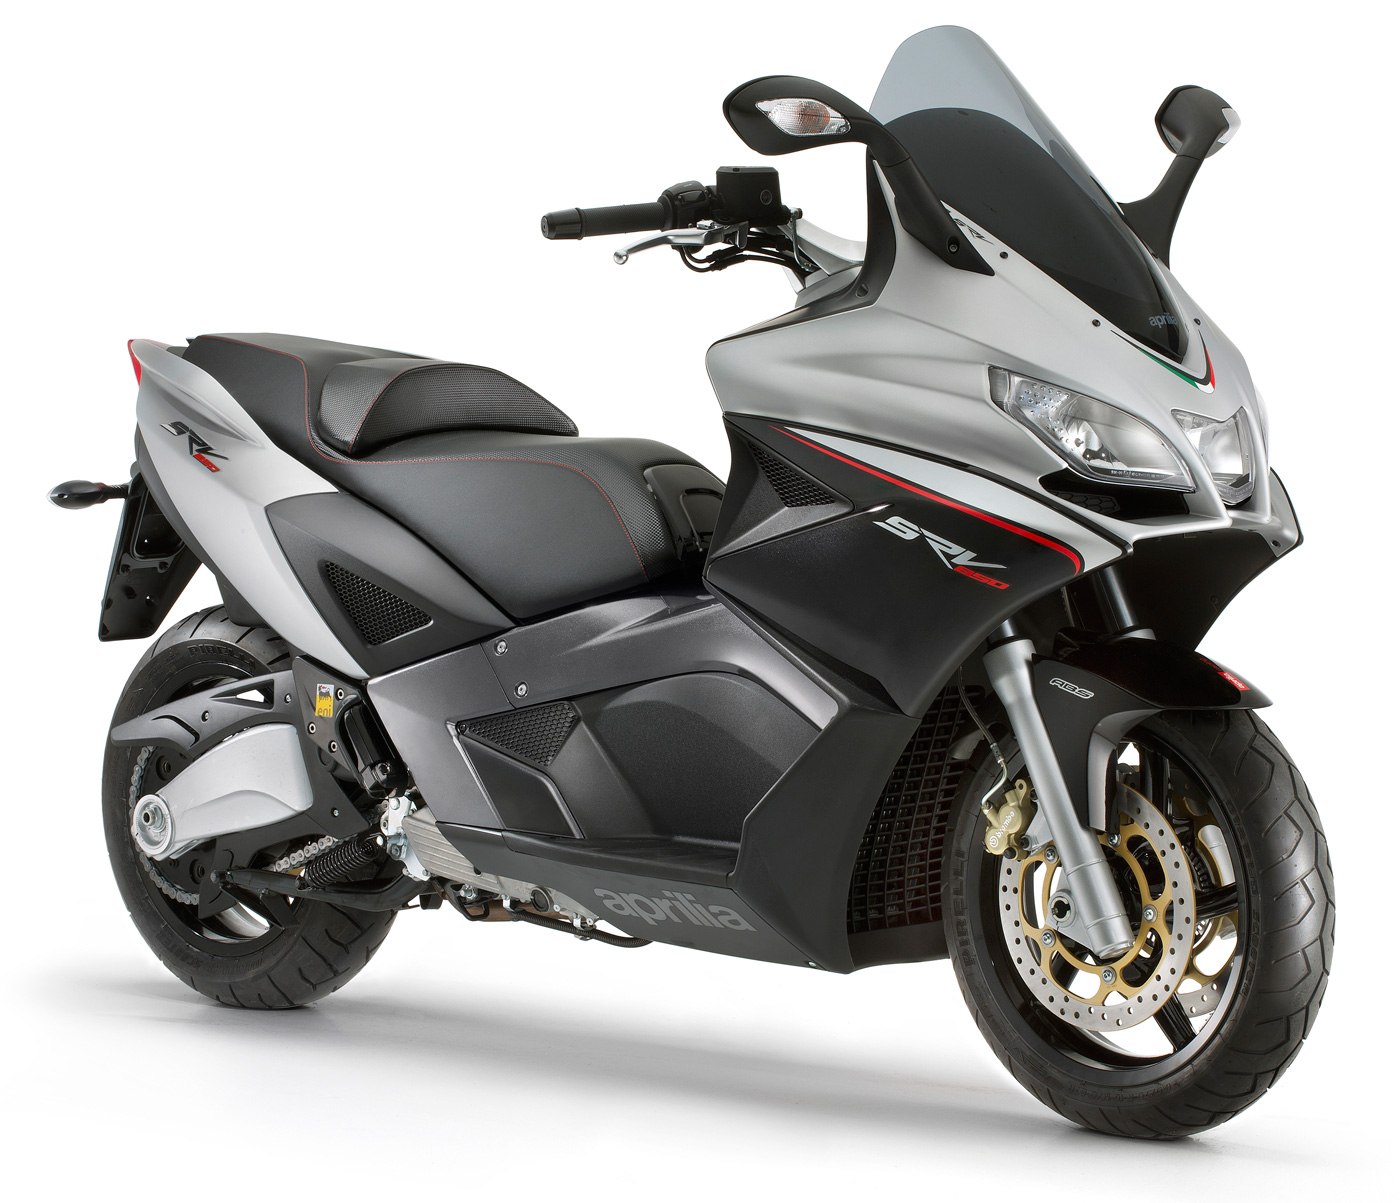 Aprilia SRV 850 ABS Price in India, Reviews, Details, Ratings & Photos